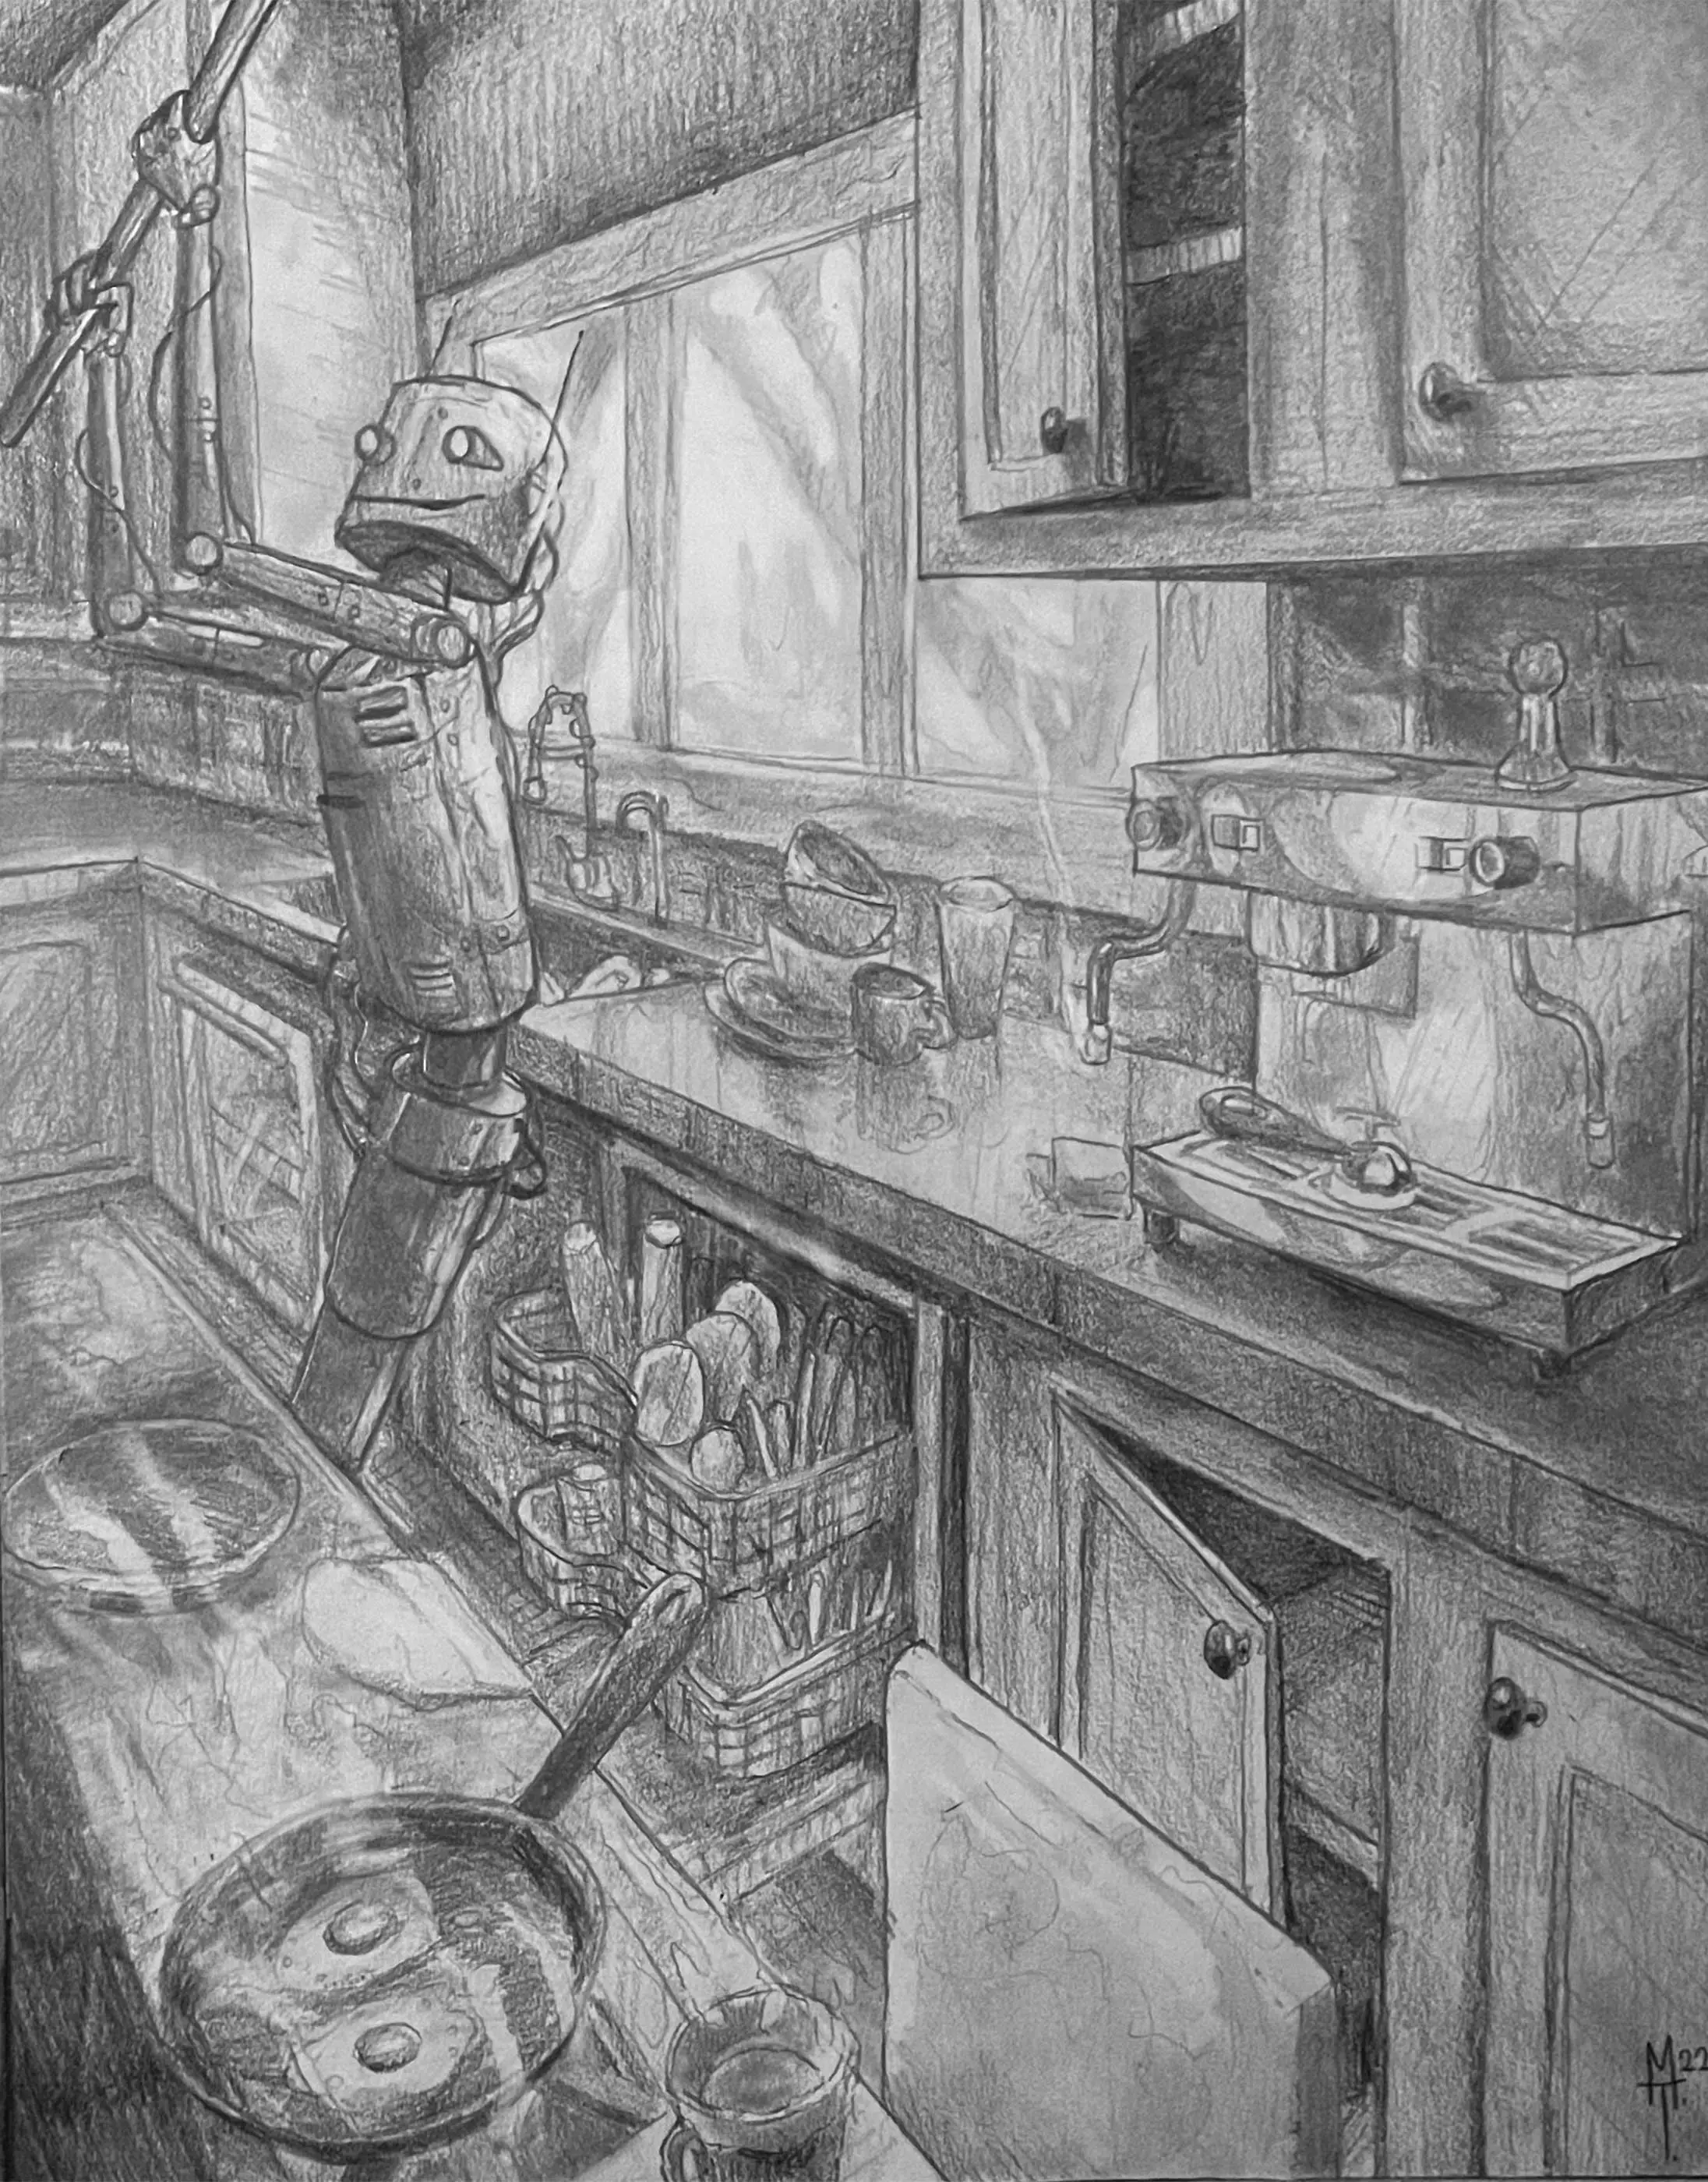 A drawing of a house's kitchen with a robot preforming chores.